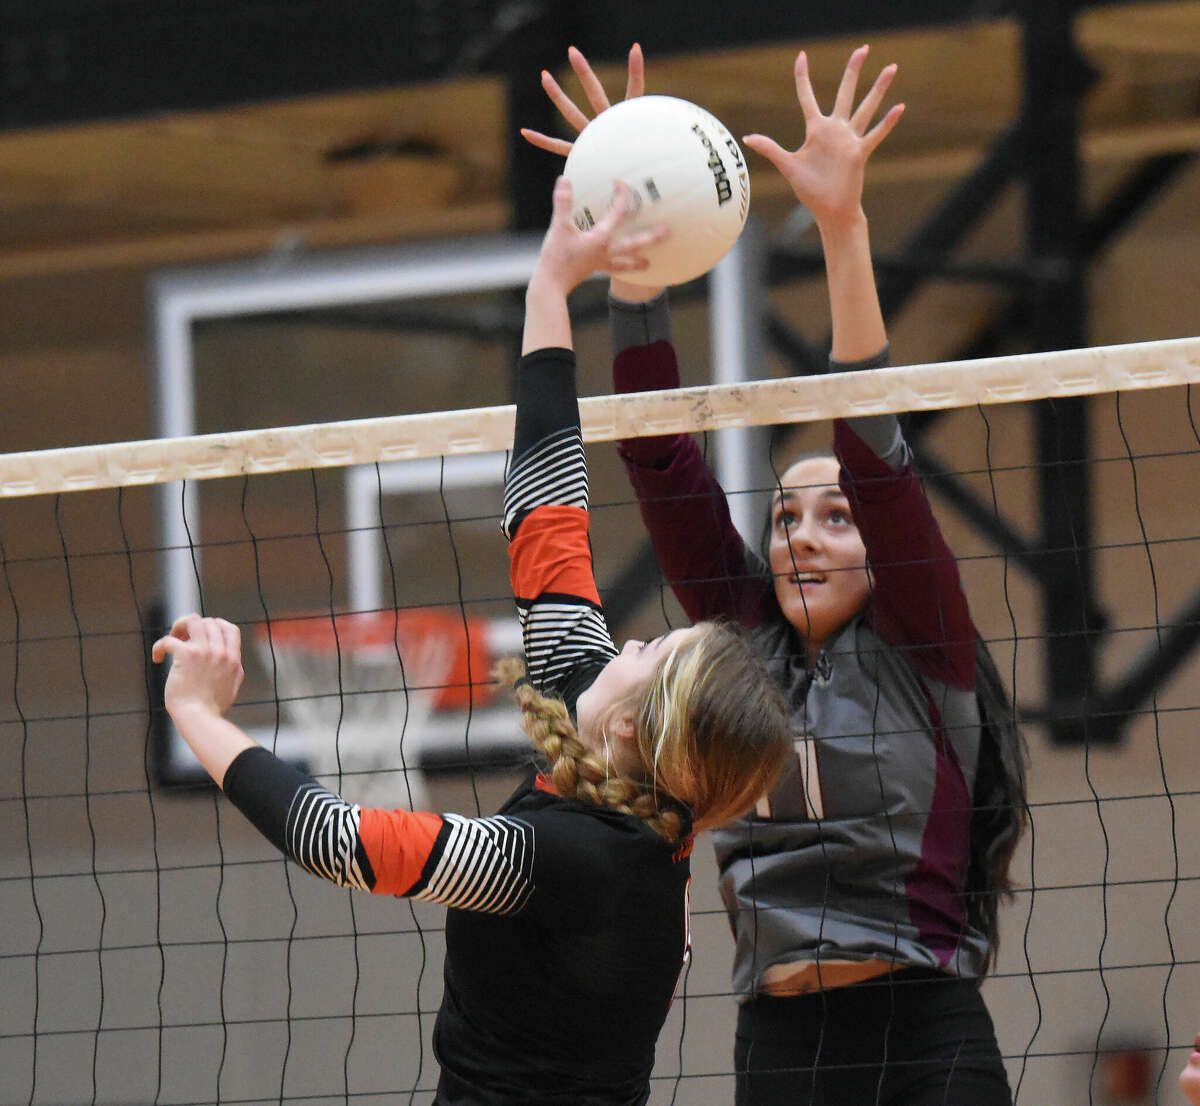 Edwardsville's Megan Knobeloch tries to tip a ball over the net against Belleville West on Thursday in the Class 4A Edwardsville Regional championship match inside Lucco-Jackson Gymnasium in Edwardsville.